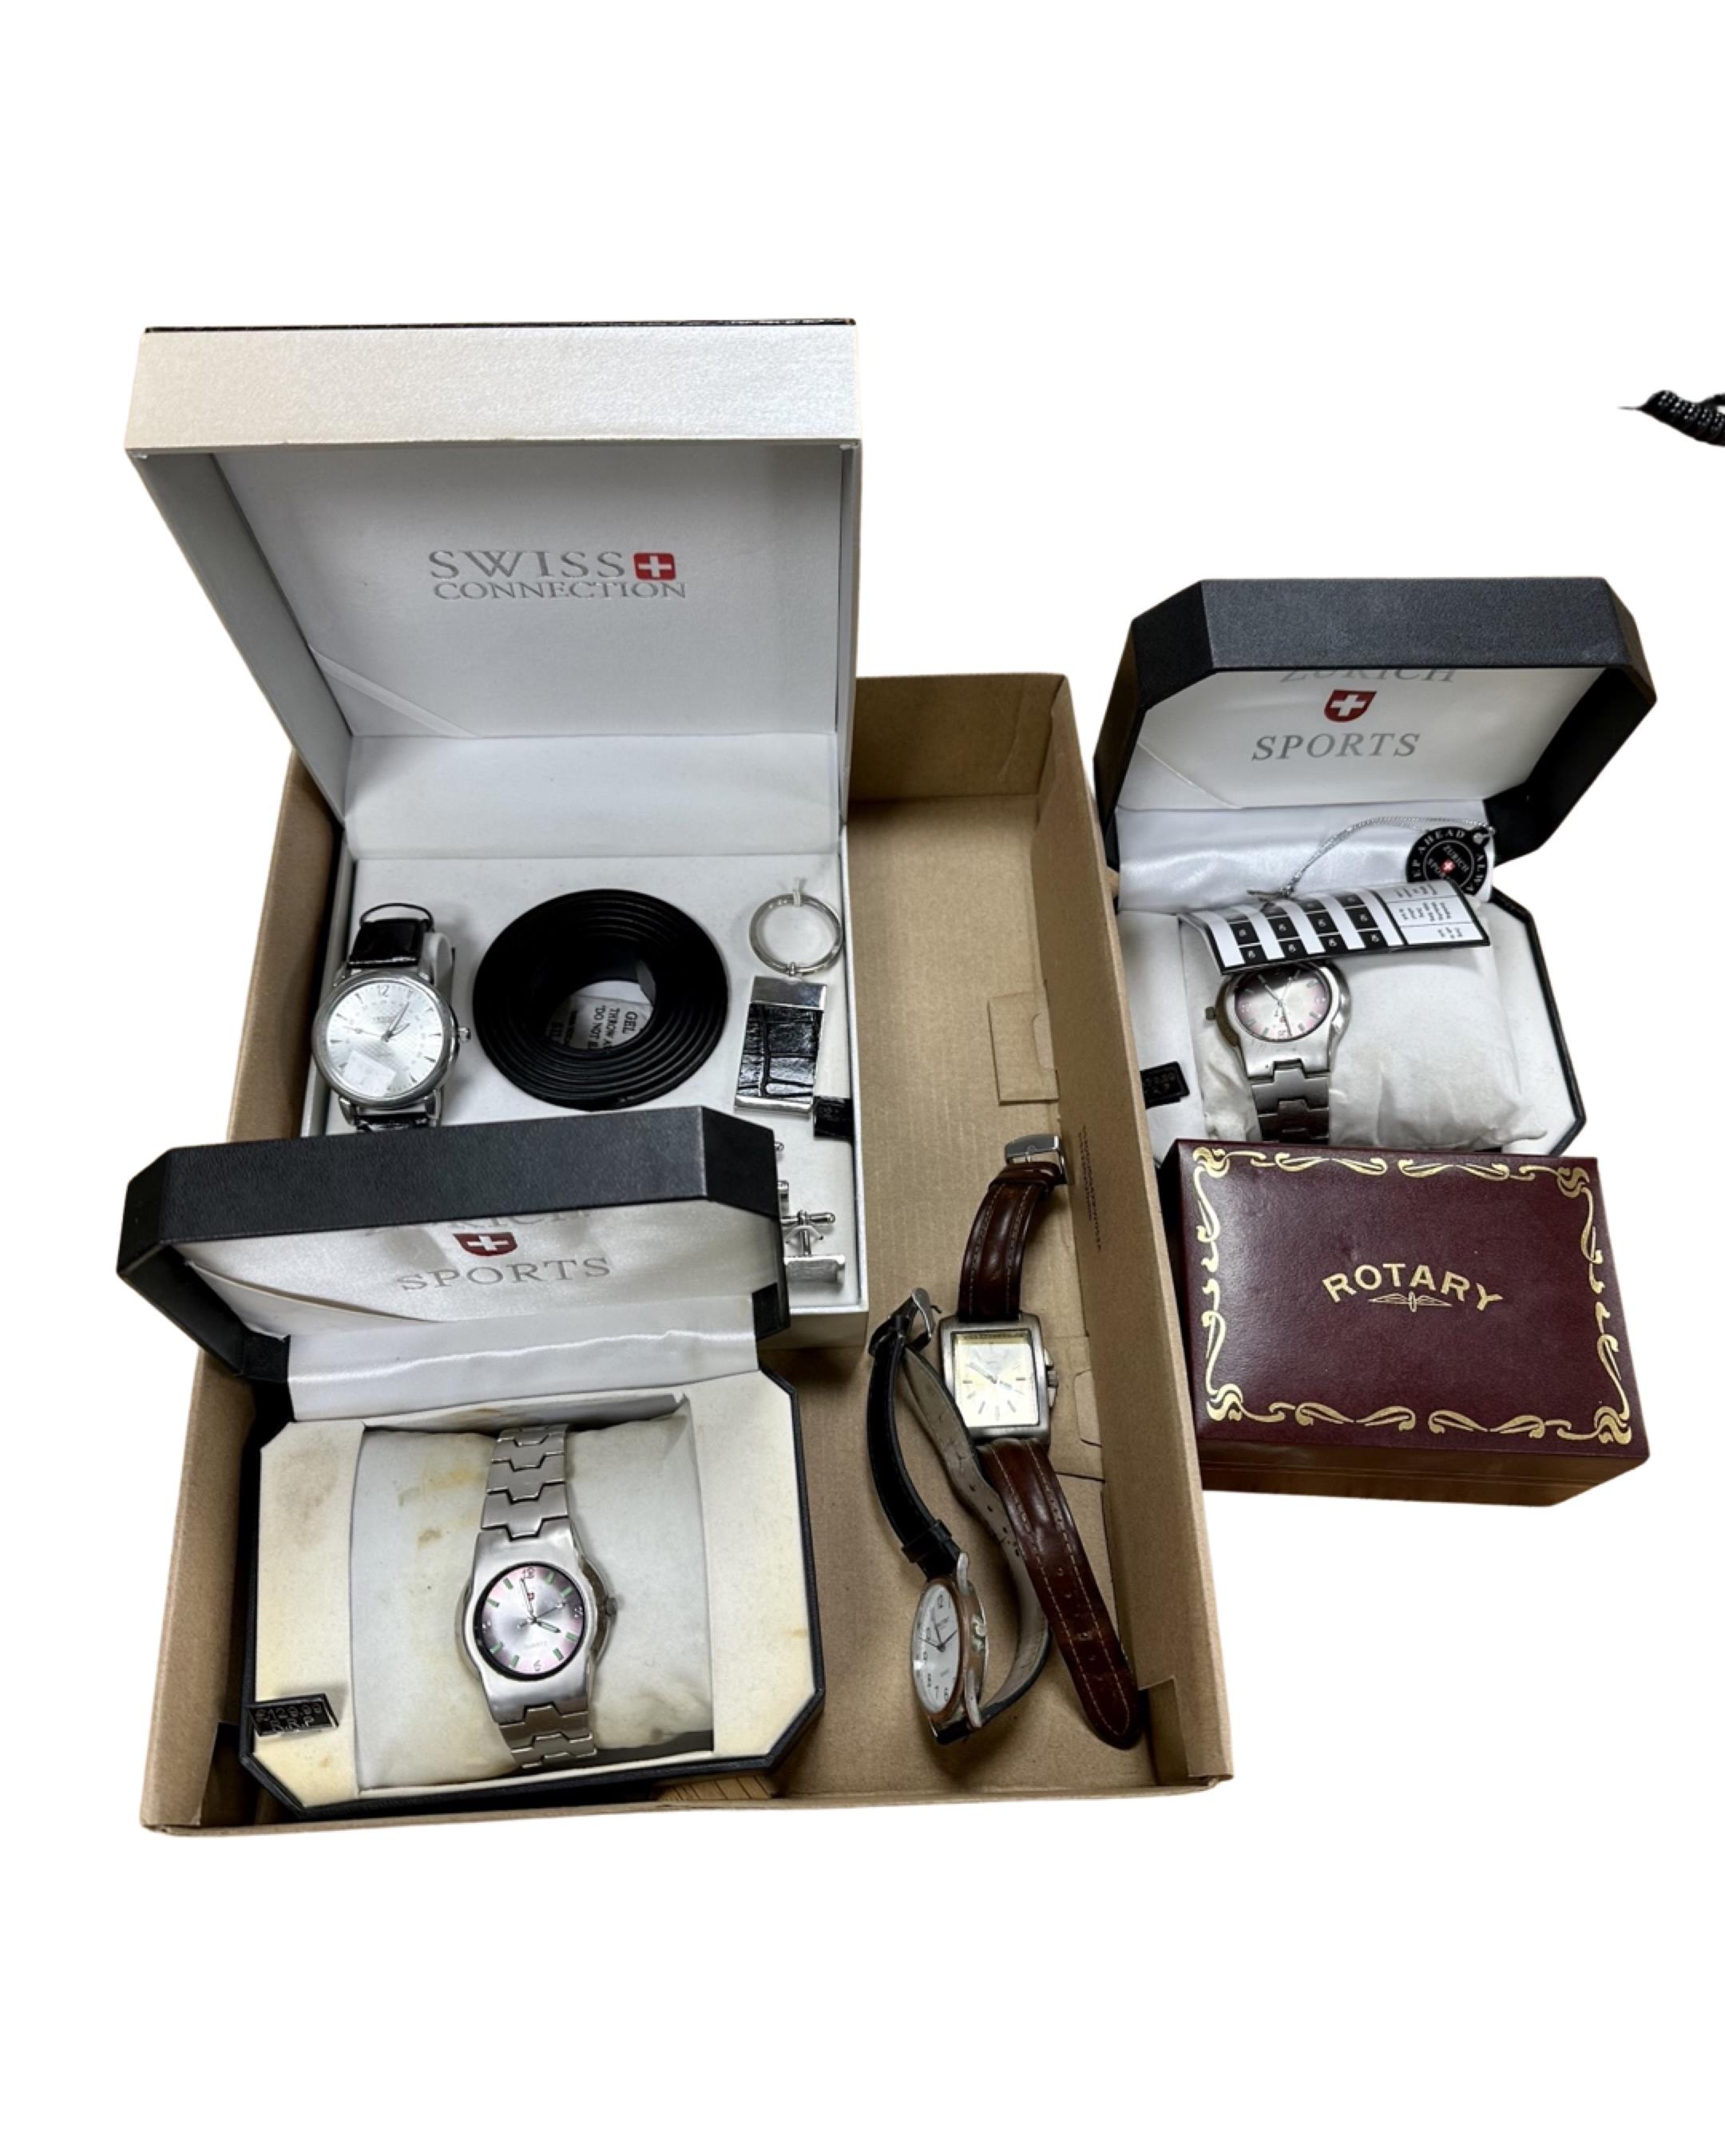 A boxed Swiss Connection gent's wristwatch set, two further Zurich Sports watches,